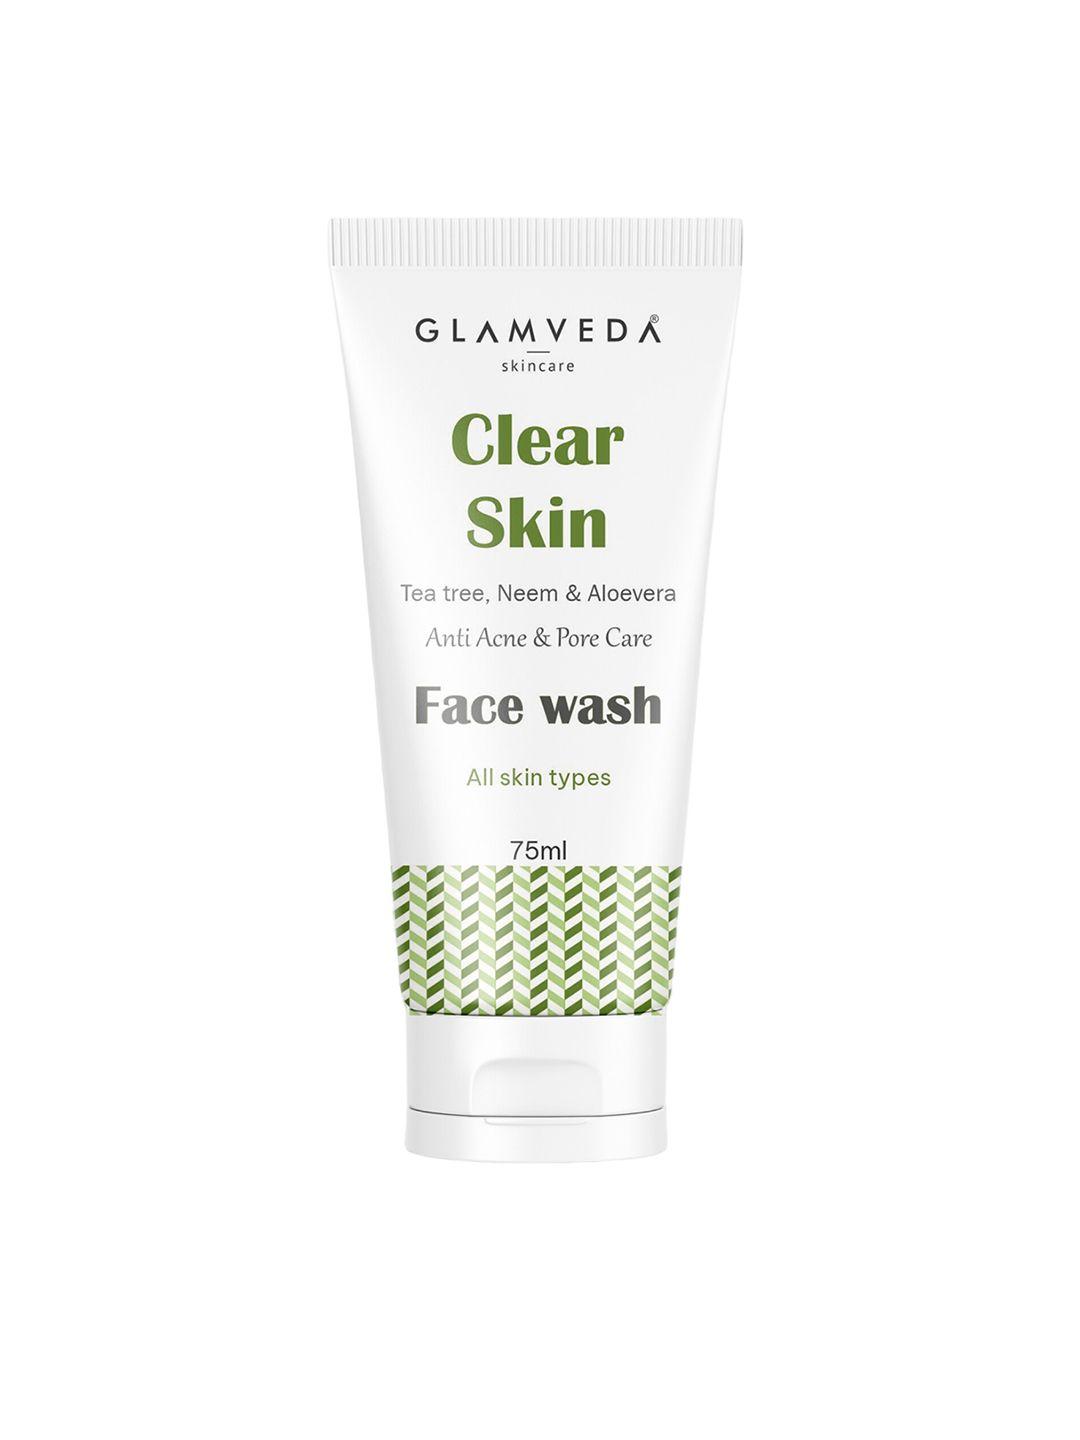 glamveda clear skin anti acne & pore care face wash with tea tree & neem - 75 ml